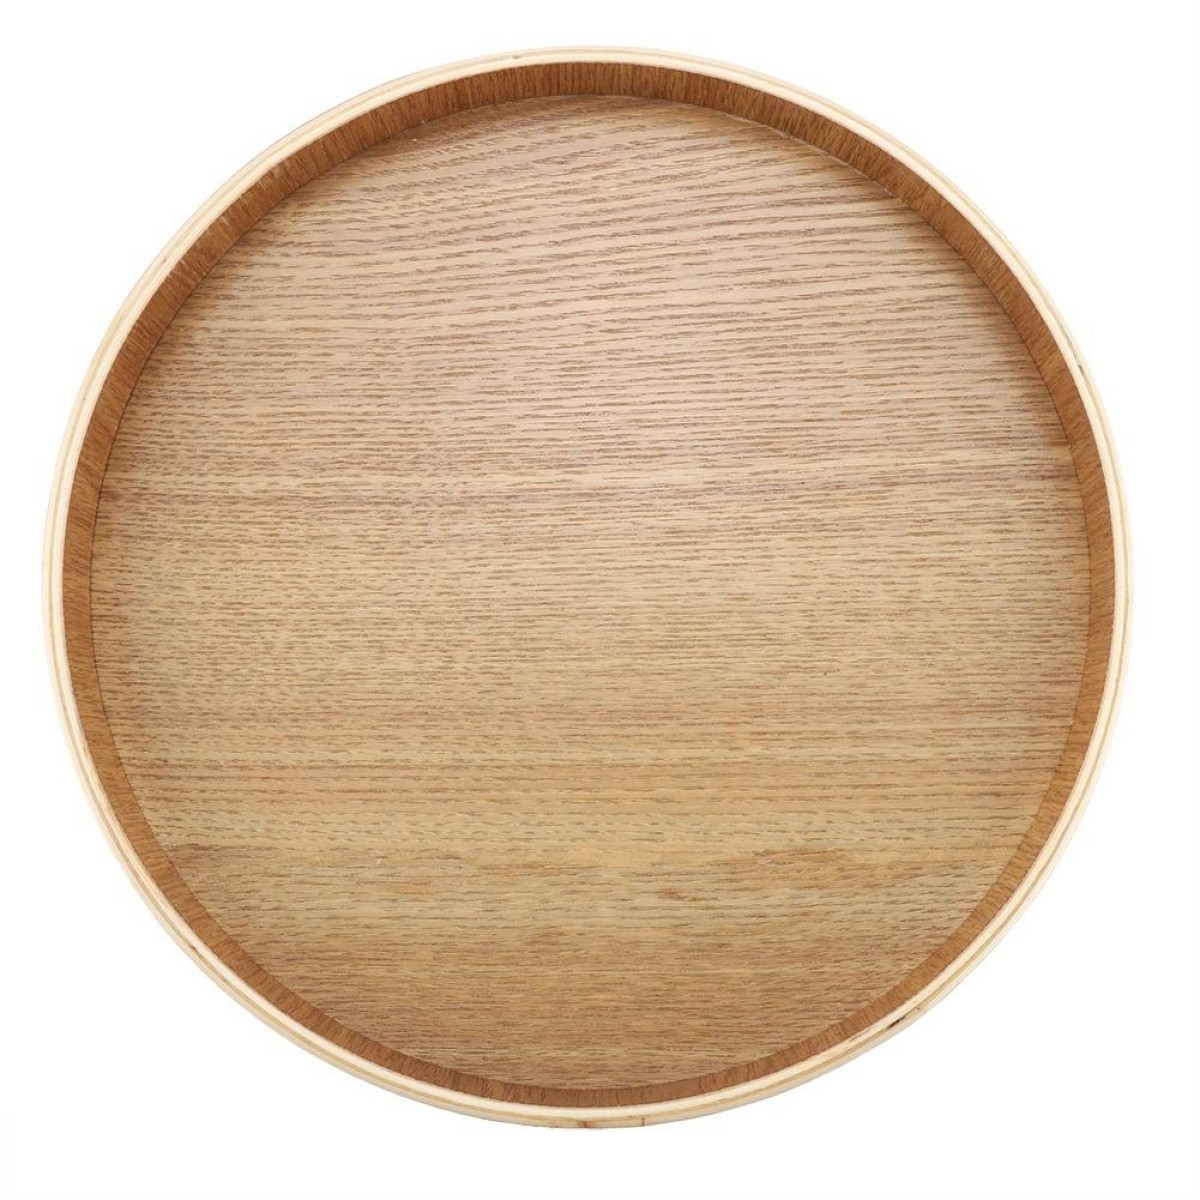 Creative Round Solid Wood Tea Tray Hotel Wooden Tay Storage Tray, Diameter: 37.5cm